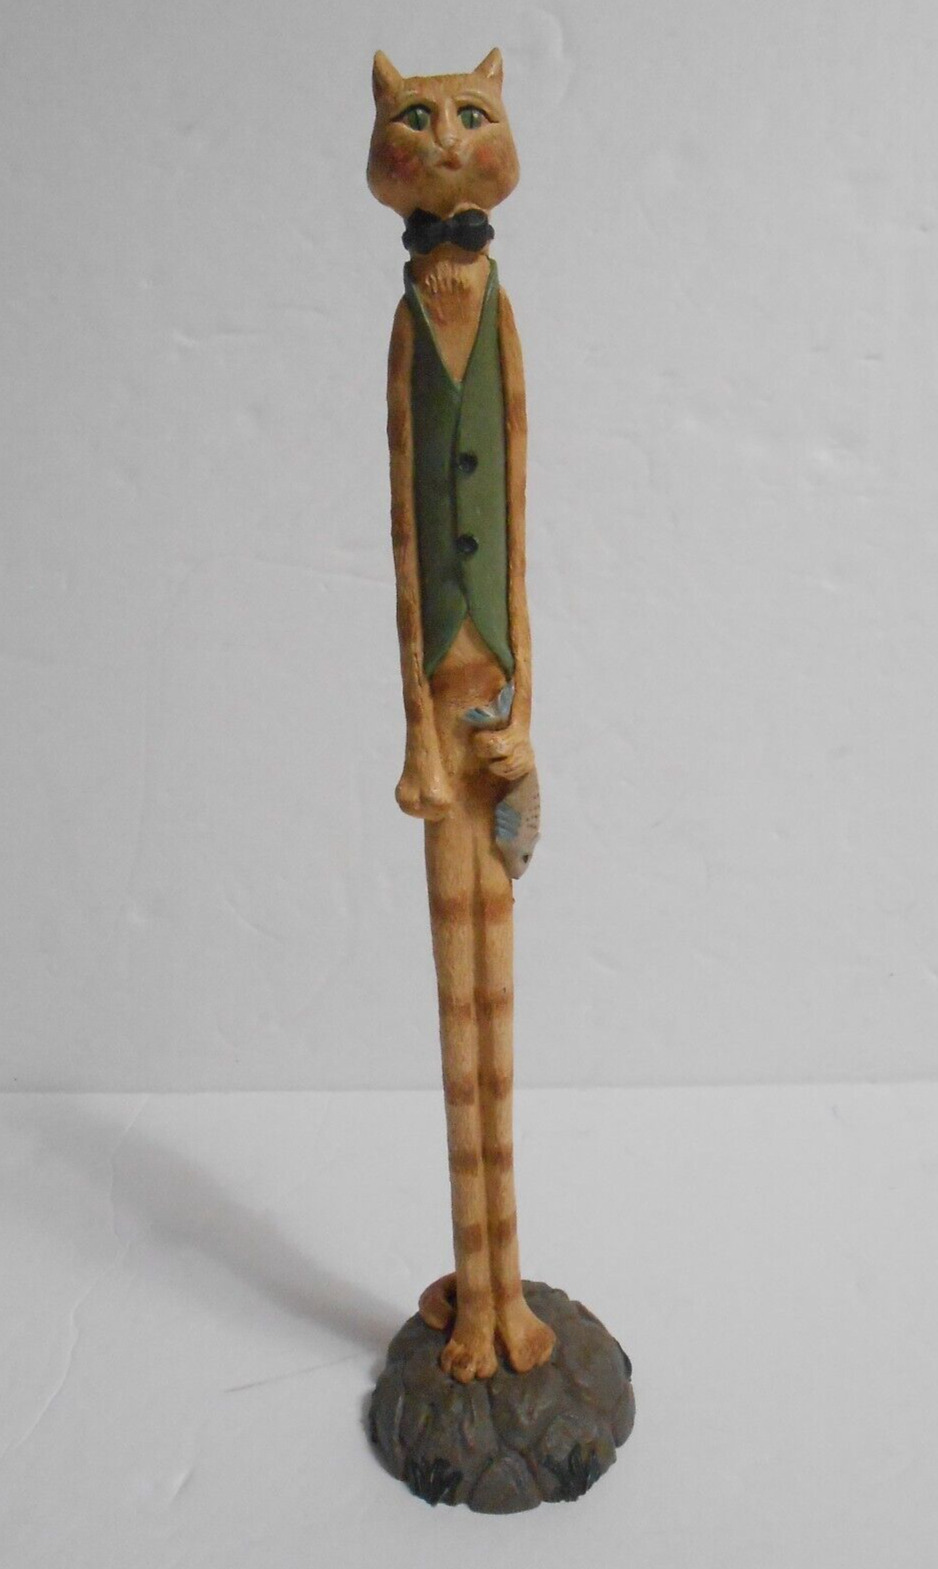 1991 Old World Pencil CAT with Fish Figurine 11.25” Hand Carved Wood Jim Shore